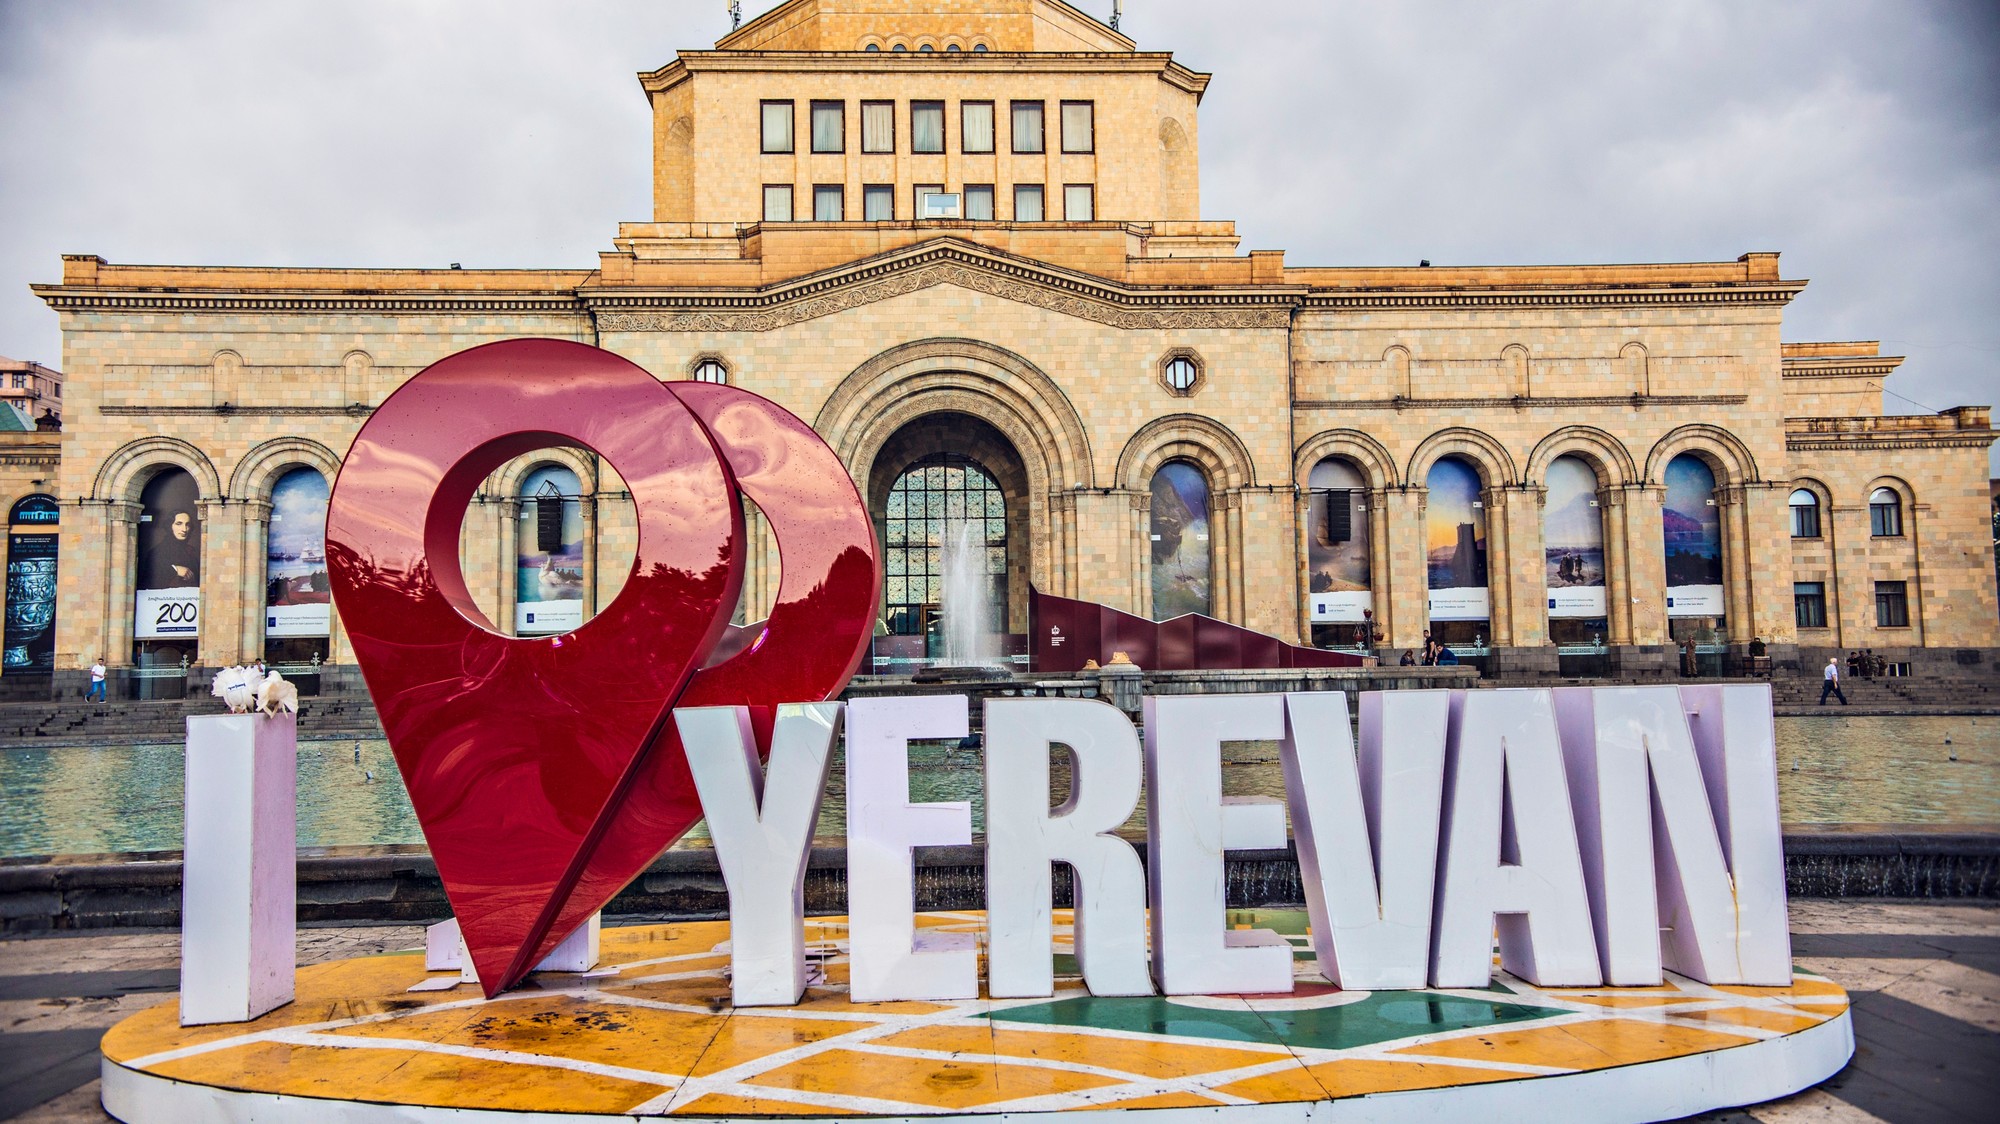 Top 10 Annual Events in Yerevan